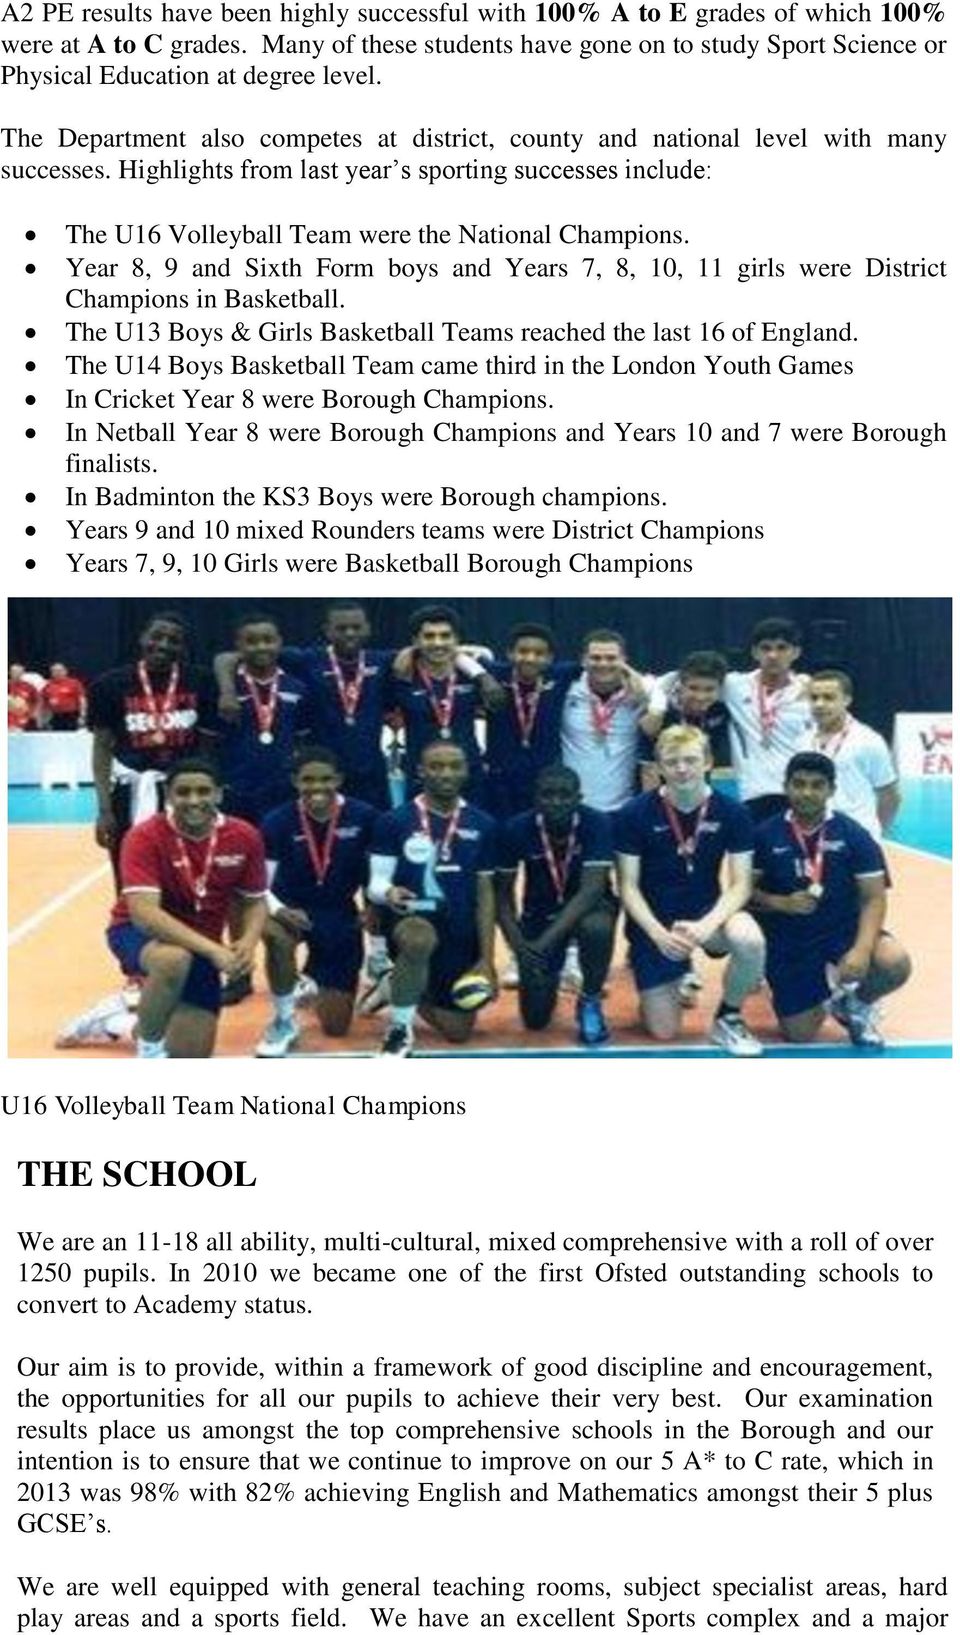 Year 8, 9 and Sixth Form boys and Years 7, 8, 10, 11 girls were District Champions in Basketball. The U13 Boys & Girls Basketball Teams reached the last 16 of England.